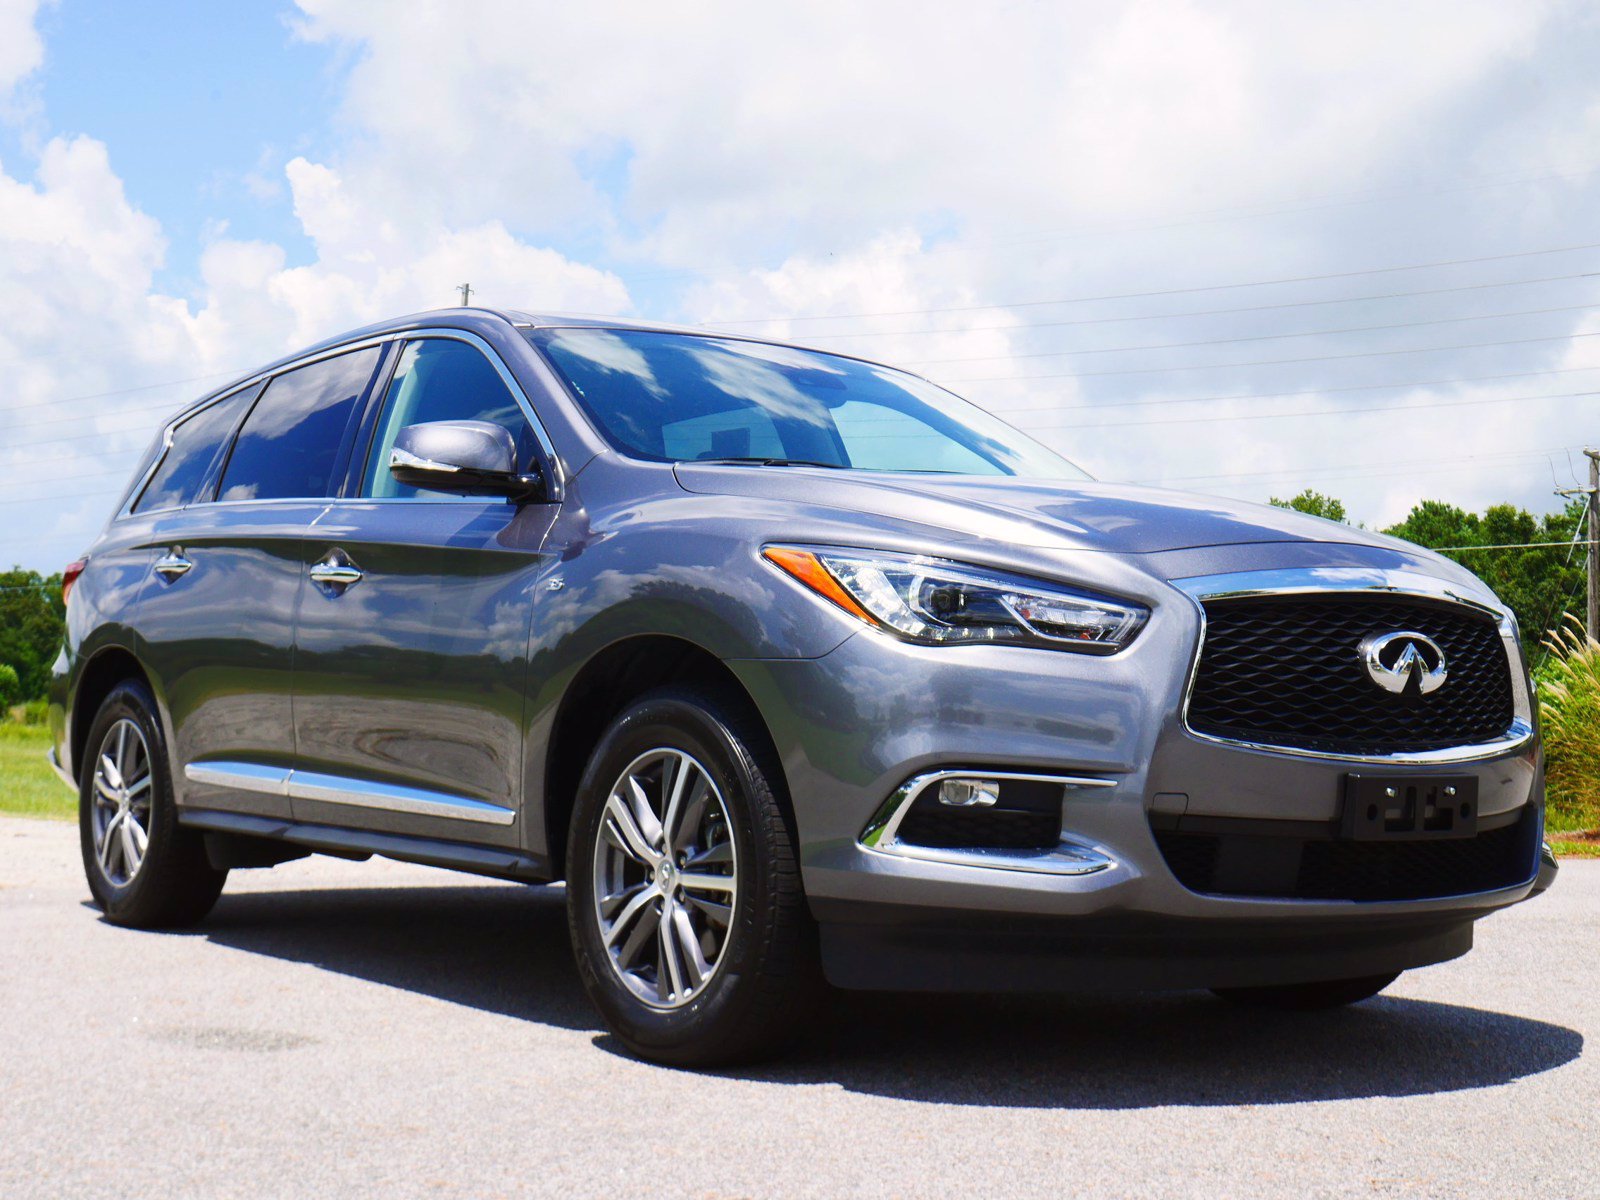 PreOwned 2019 INFINITI QX60 PURE AWD 4D Sport Utility